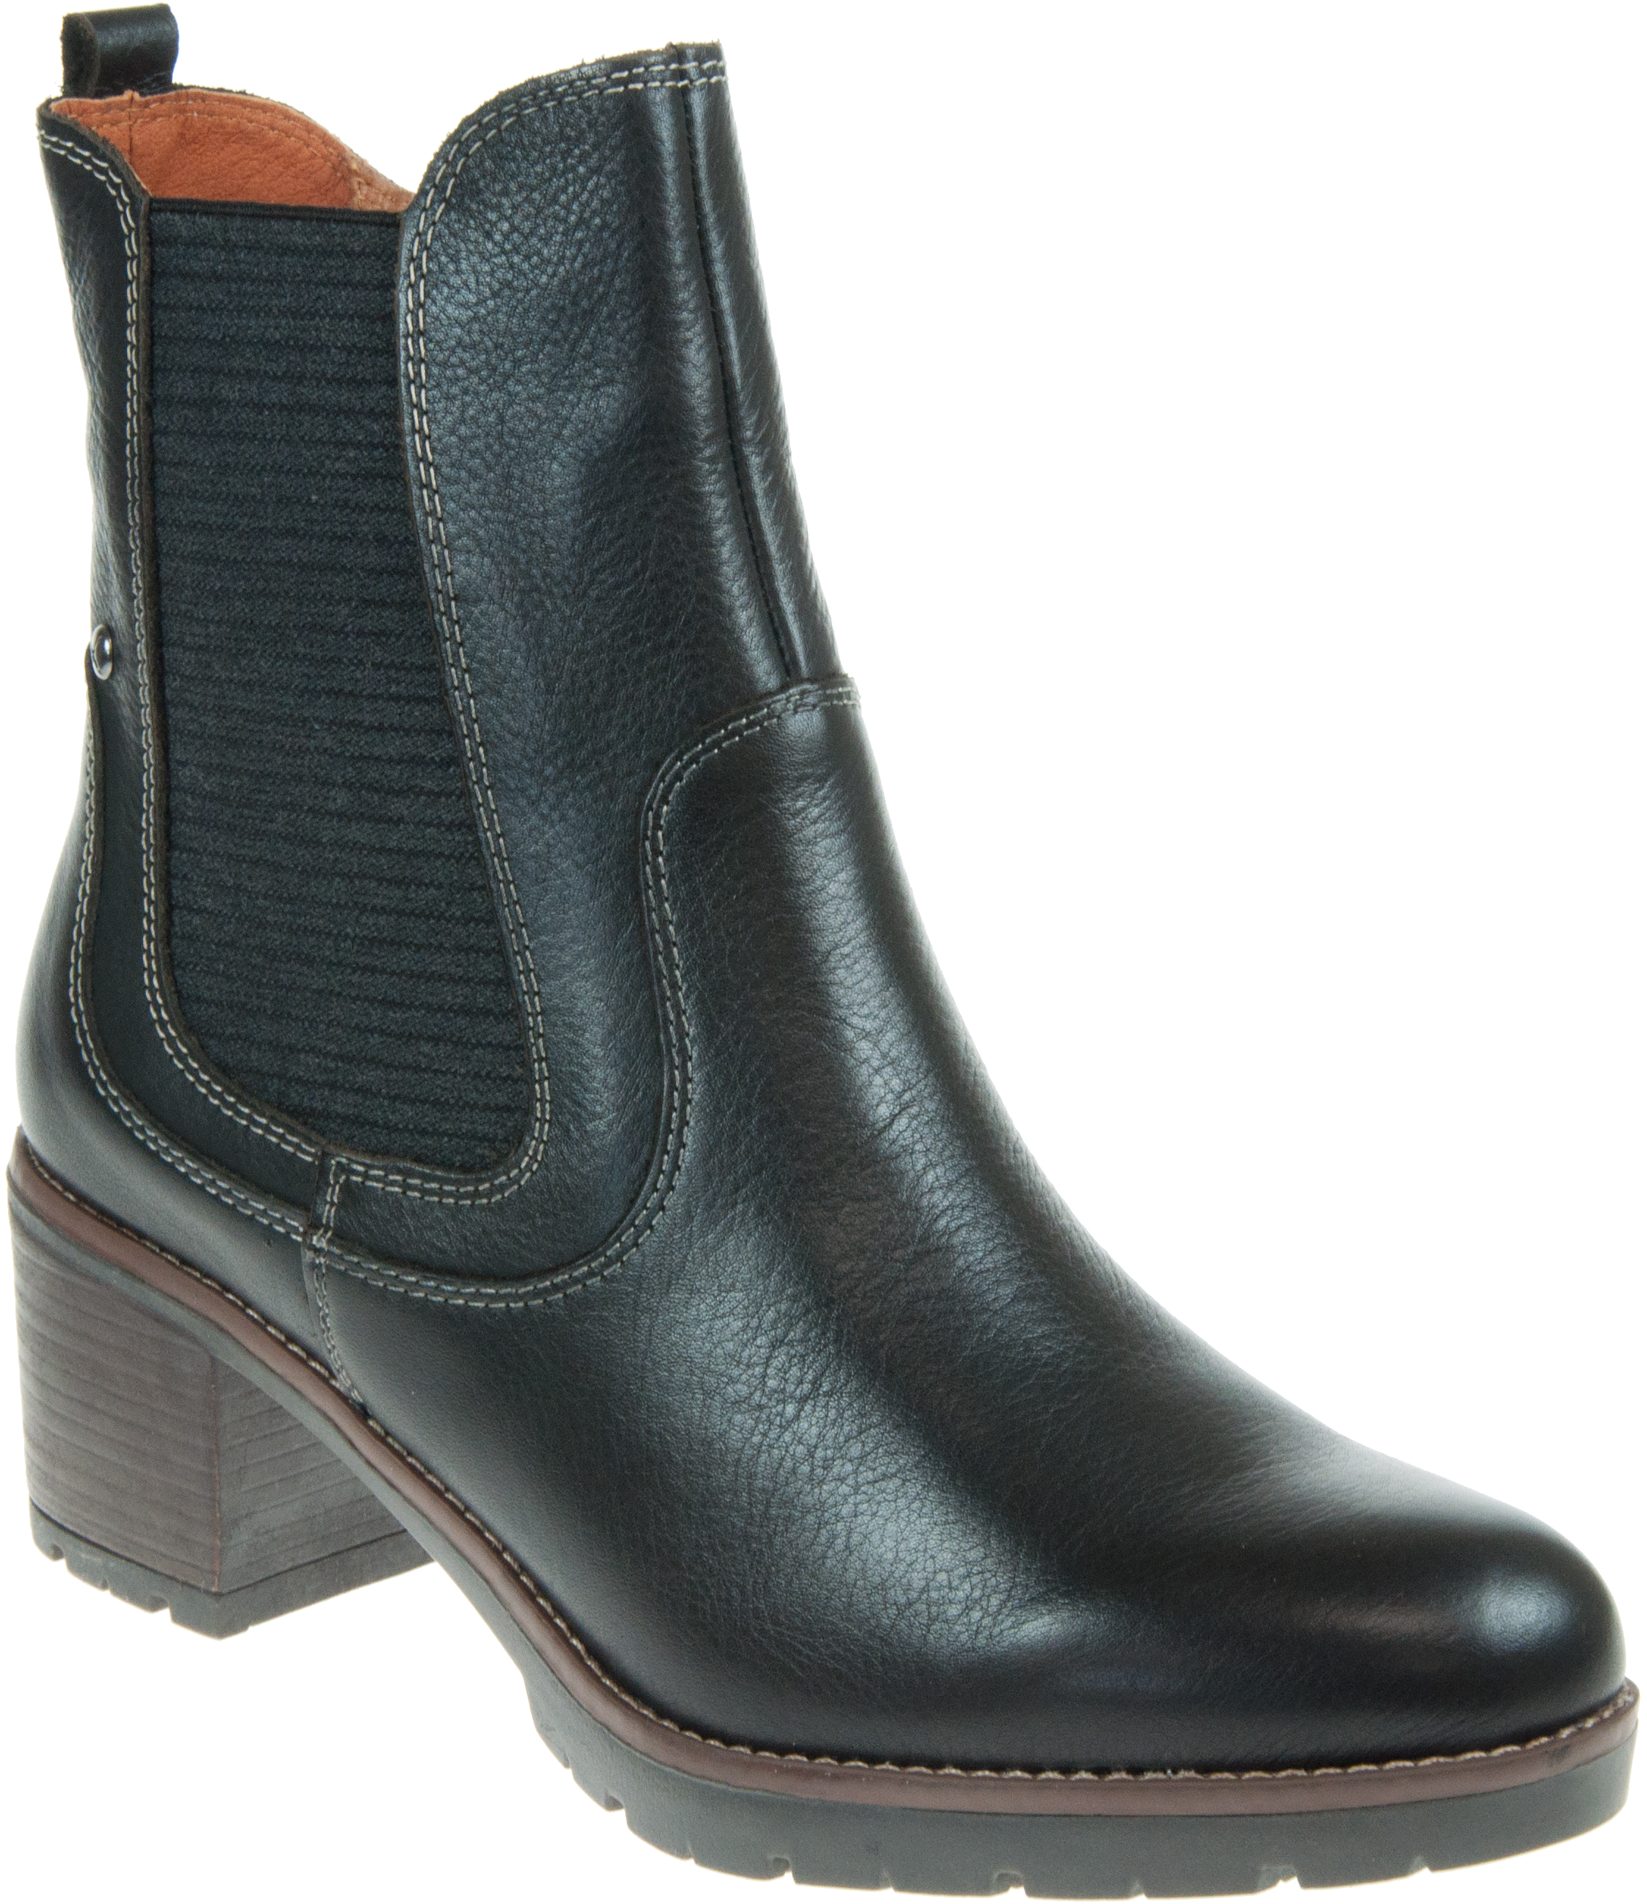 Pikolinos Llanes W7H Black W7H-8948 000 - Ankle Boots - Humphries Shoes